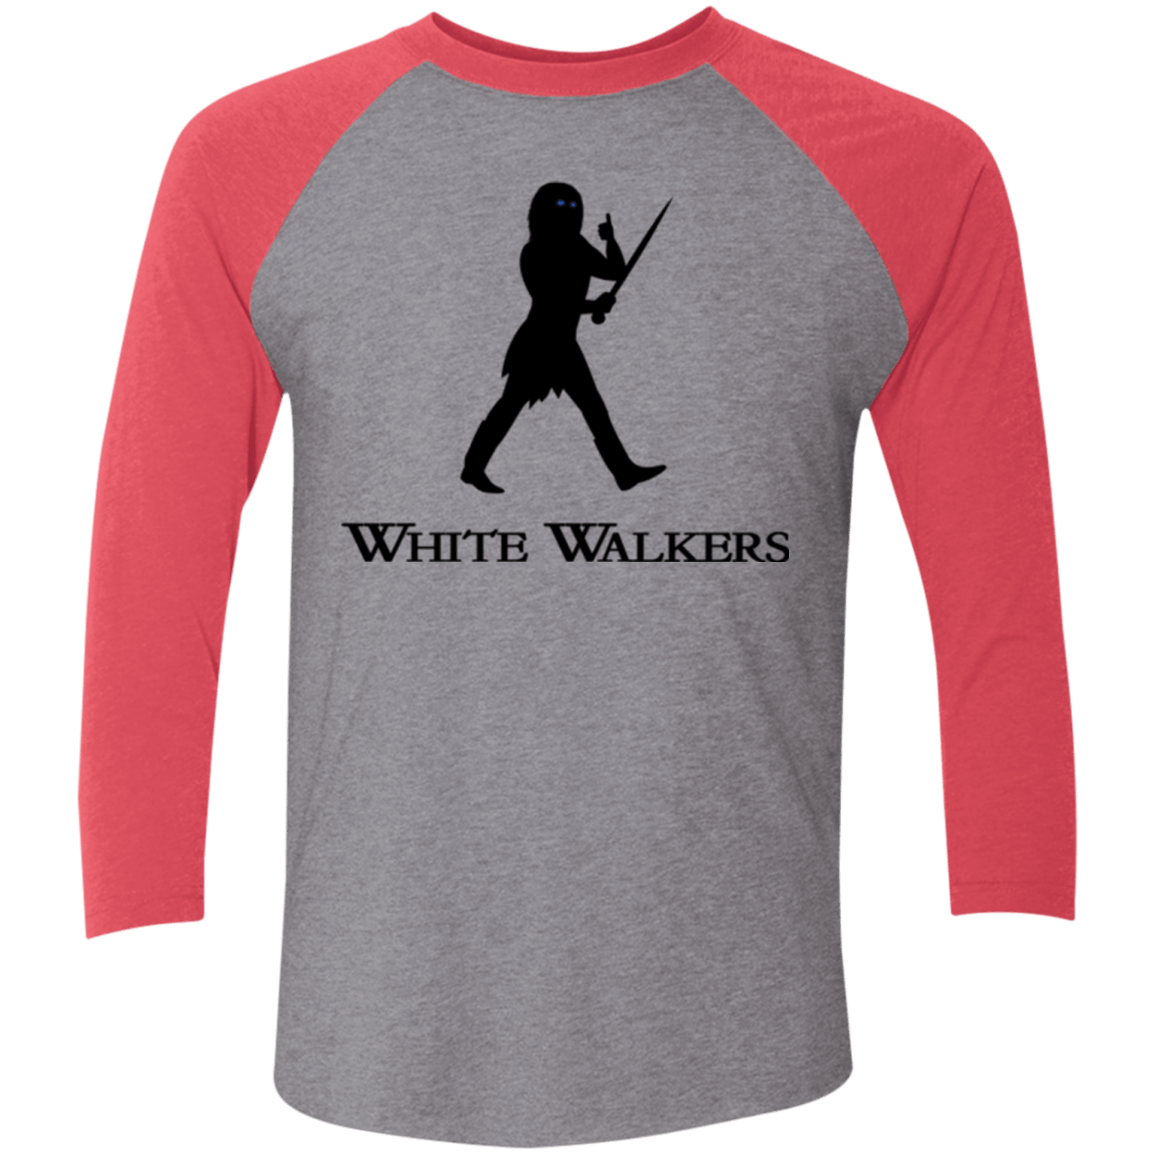 T-Shirts Premium Heather/ Vintage Red / X-Small White walkers Men's Triblend 3/4 Sleeve